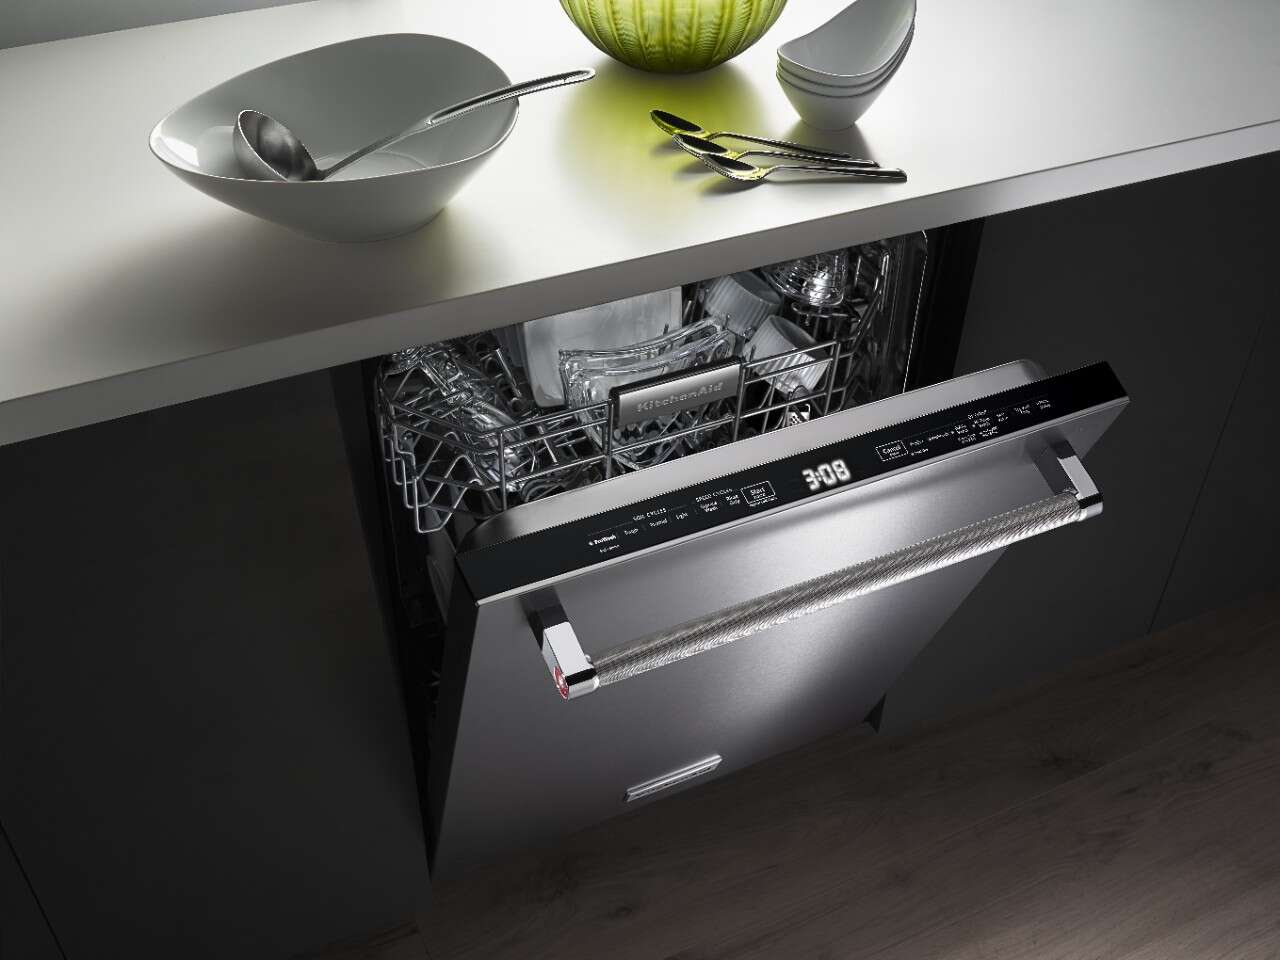 A KitchenAid kdtm704ess dishwasher shown with its door slightly open 